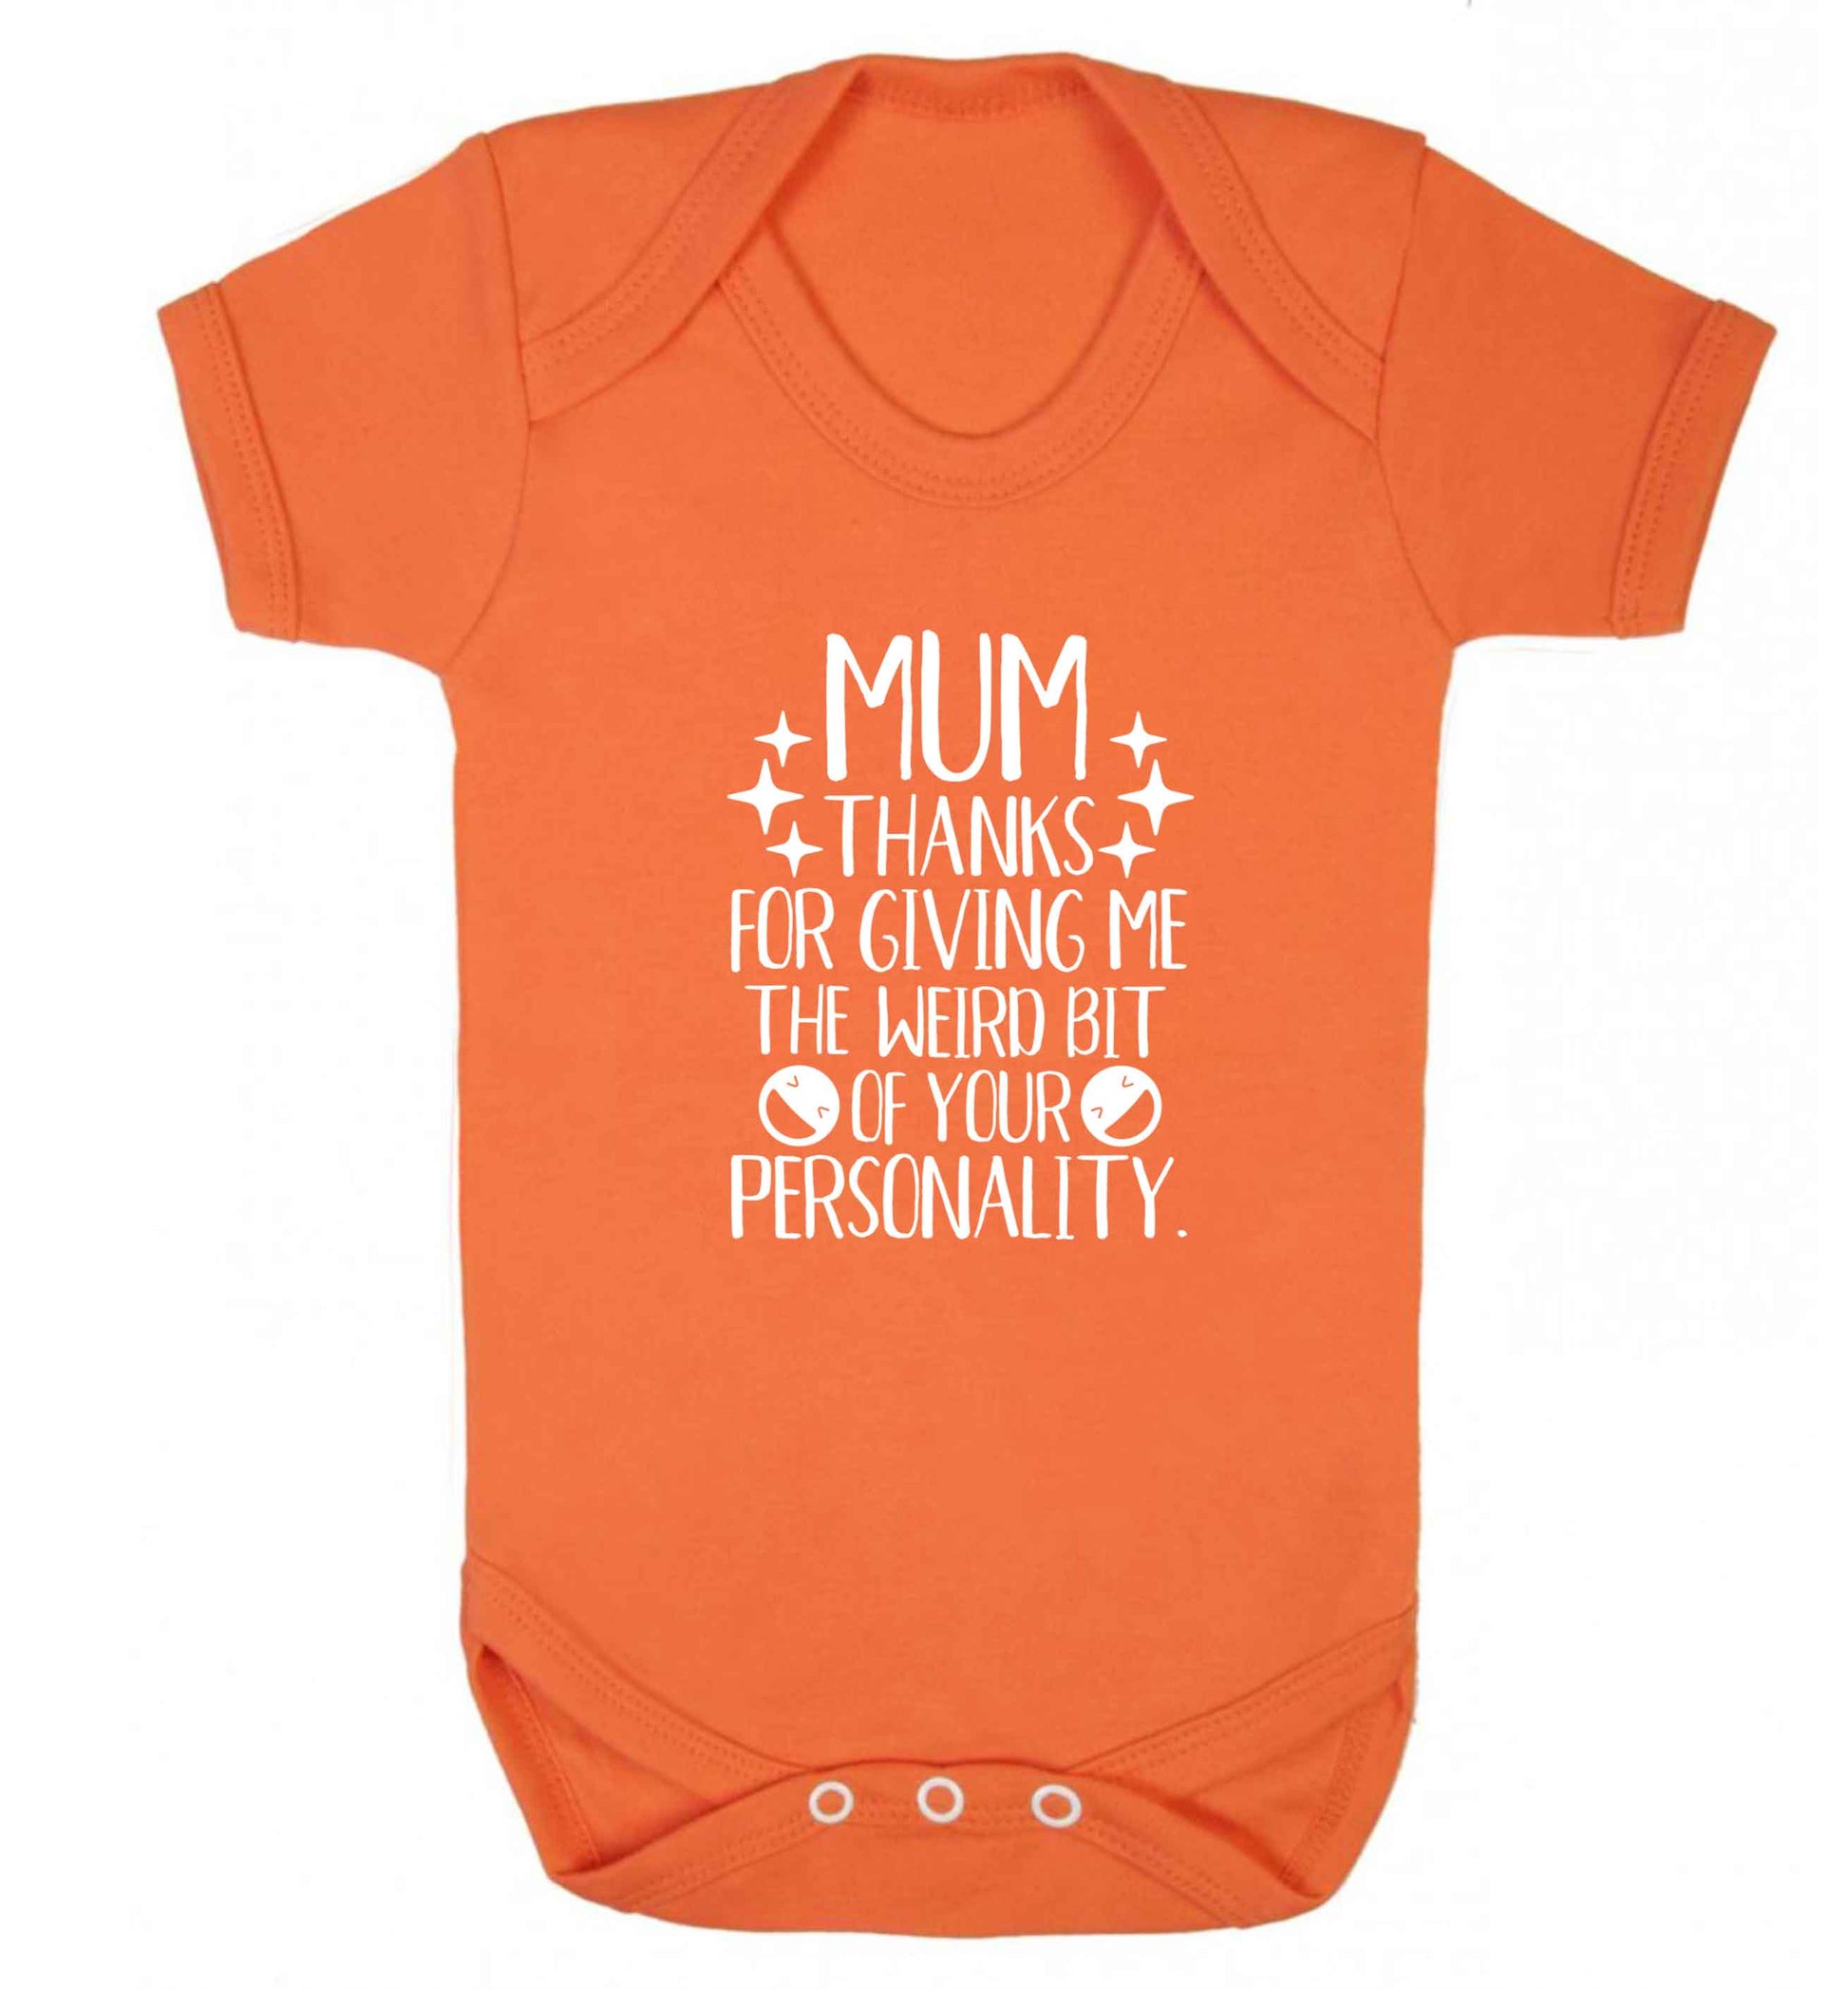 Mum, I love you more than halloumi and if you know me at all you know how deep that is baby vest orange 18-24 months